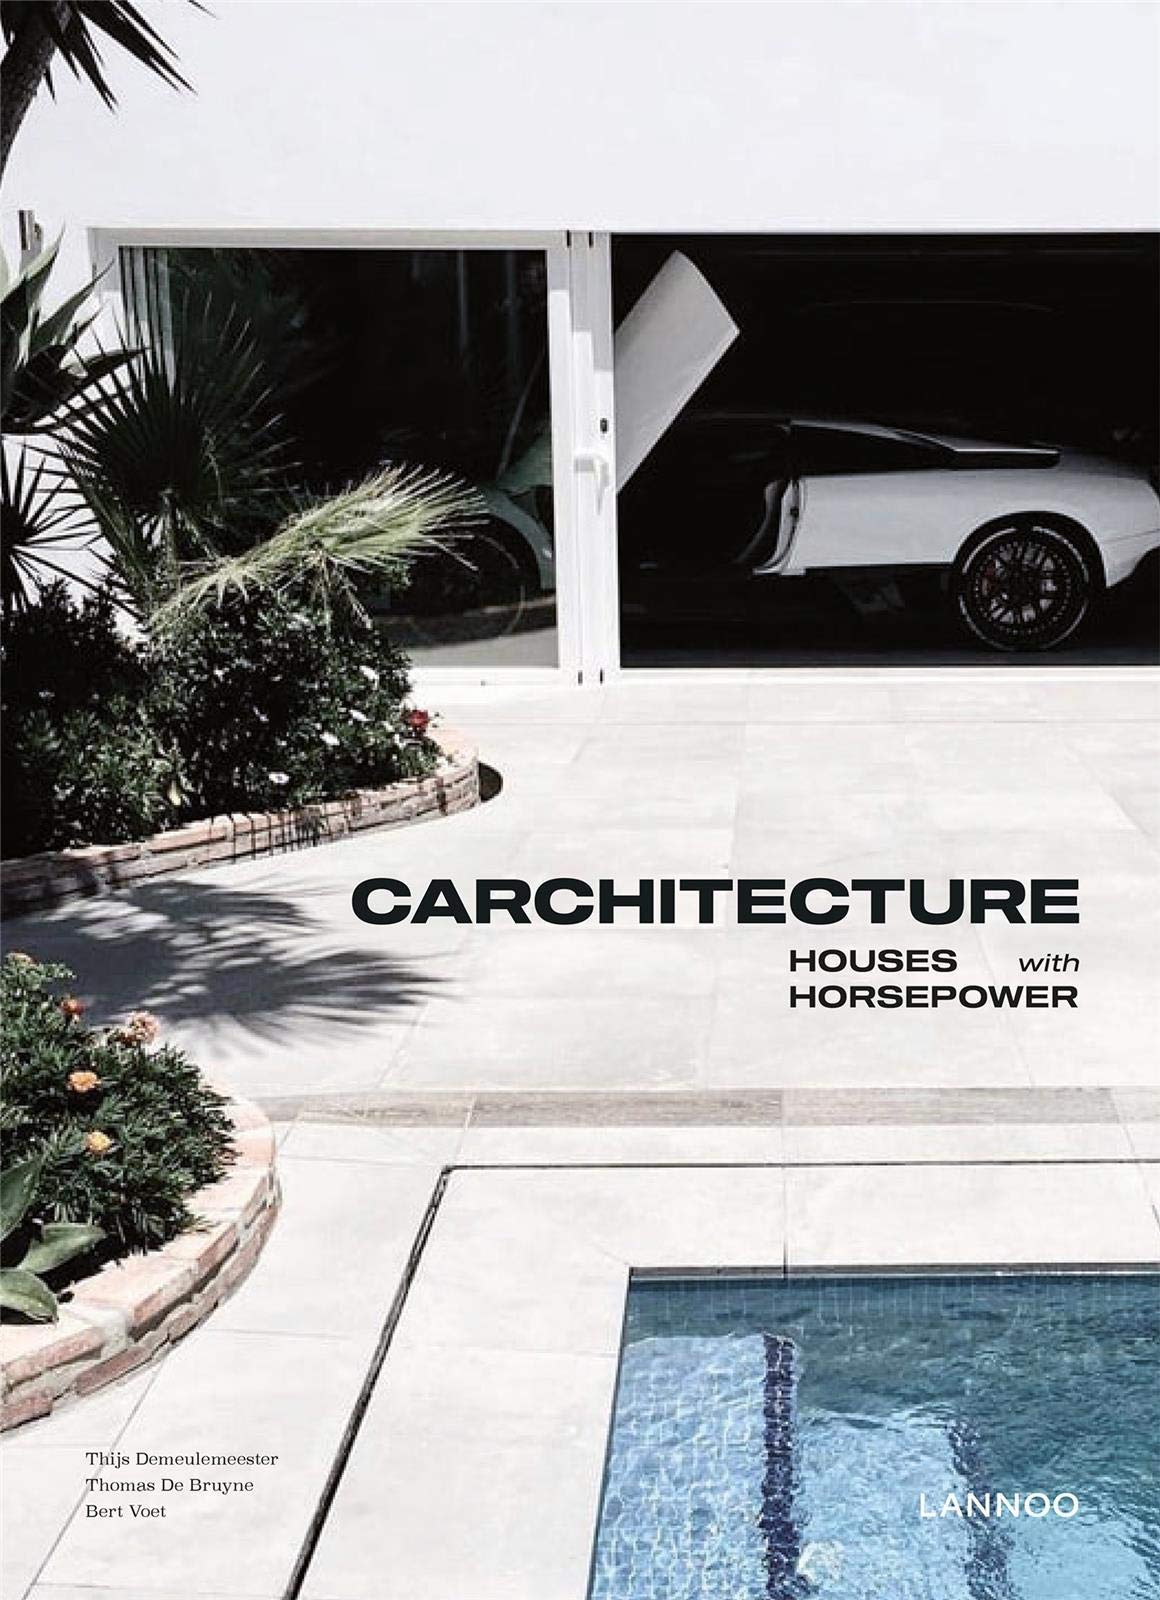 Carchitecture: Houses with Horsepower